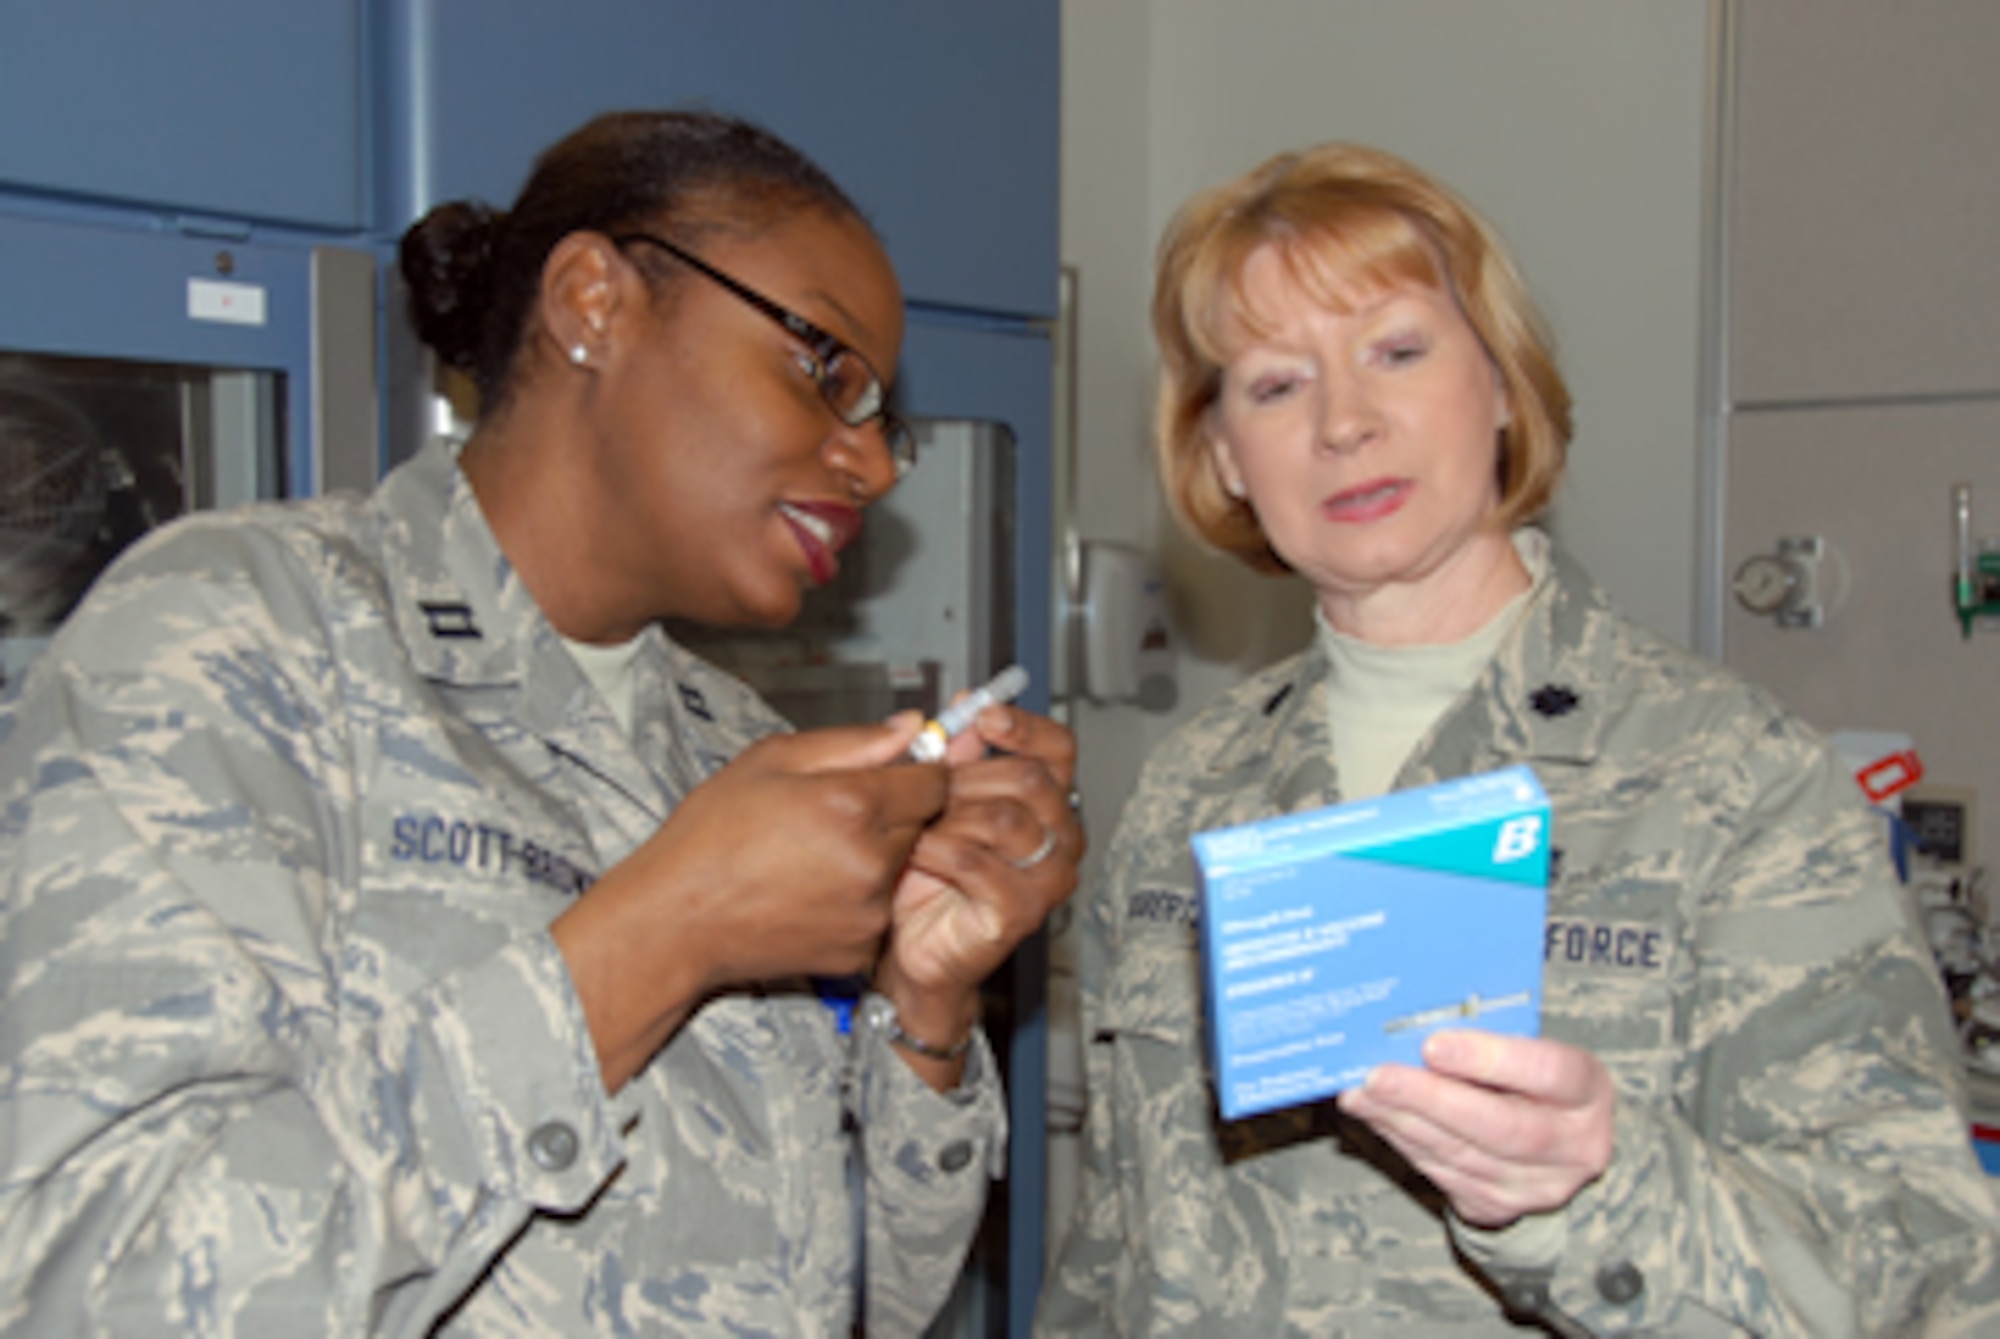 Capt. Sherteria Scott-Brown, left, of the 908th Airlift Wing's Aeromedical Staging Squadron, and Lt. Colonel Donna Roberts inspect the expiration dates on a shipment of Hepatitis B vaccine. Those preparing to deploy should take precautions to protect against the three strains of the disease. According to the World Health Organization, nearly one third of the world's population, more than 2 billion people, have been infected with the Hepatitis B virus. Hepatitis C is transmitted by blood-to-blood contact. Chronic infection can cause inflammation of the liver, which can progress to scarring of the liver. In some cases, liver failure or liver cancer can develop.